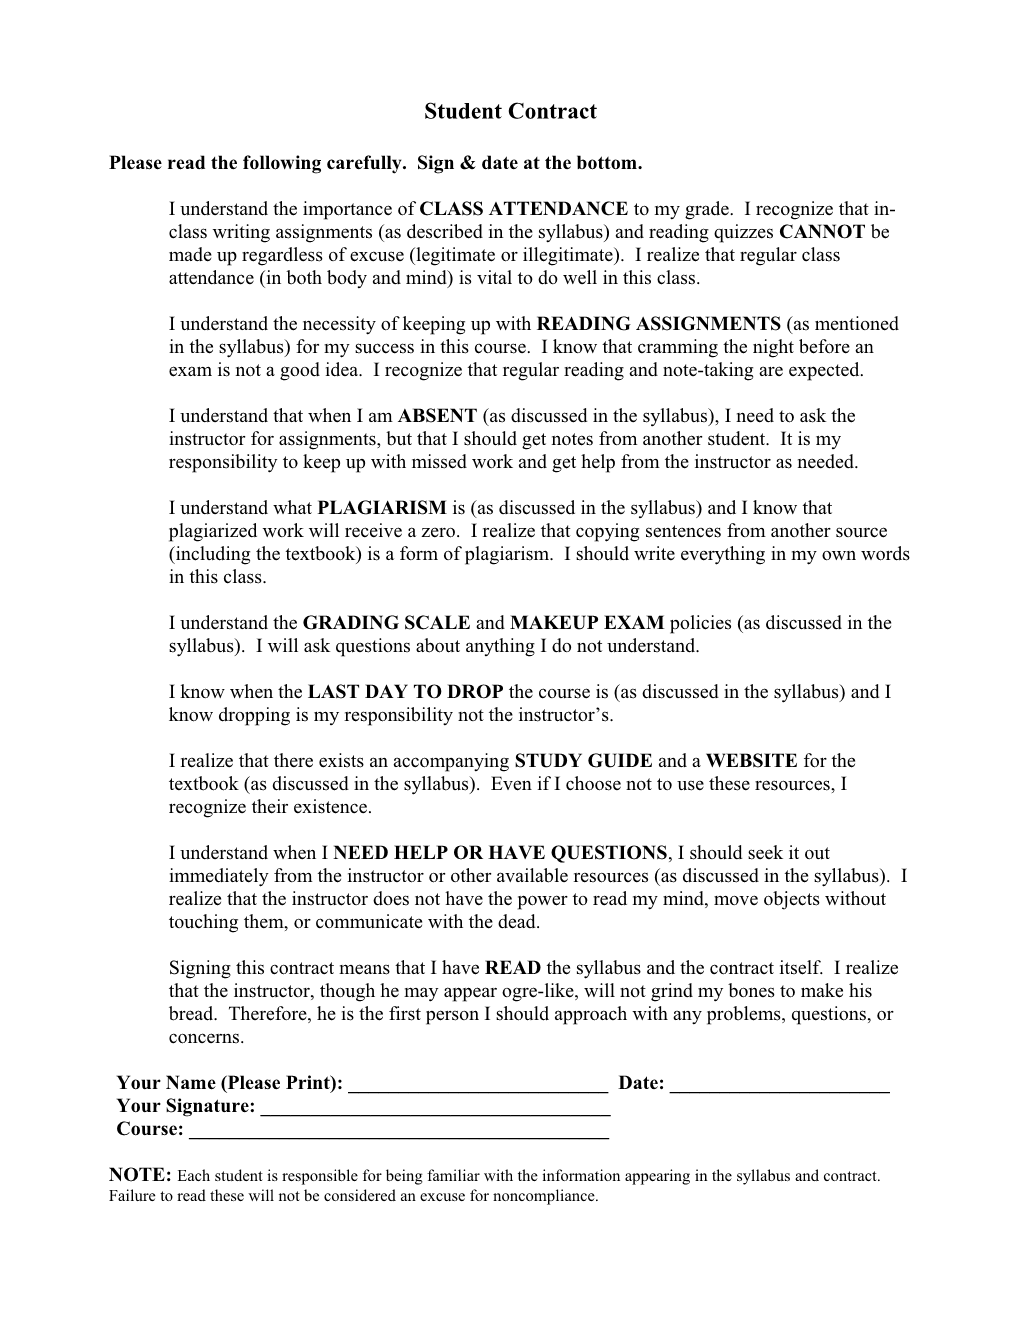 Student Contract (Fall 2004)